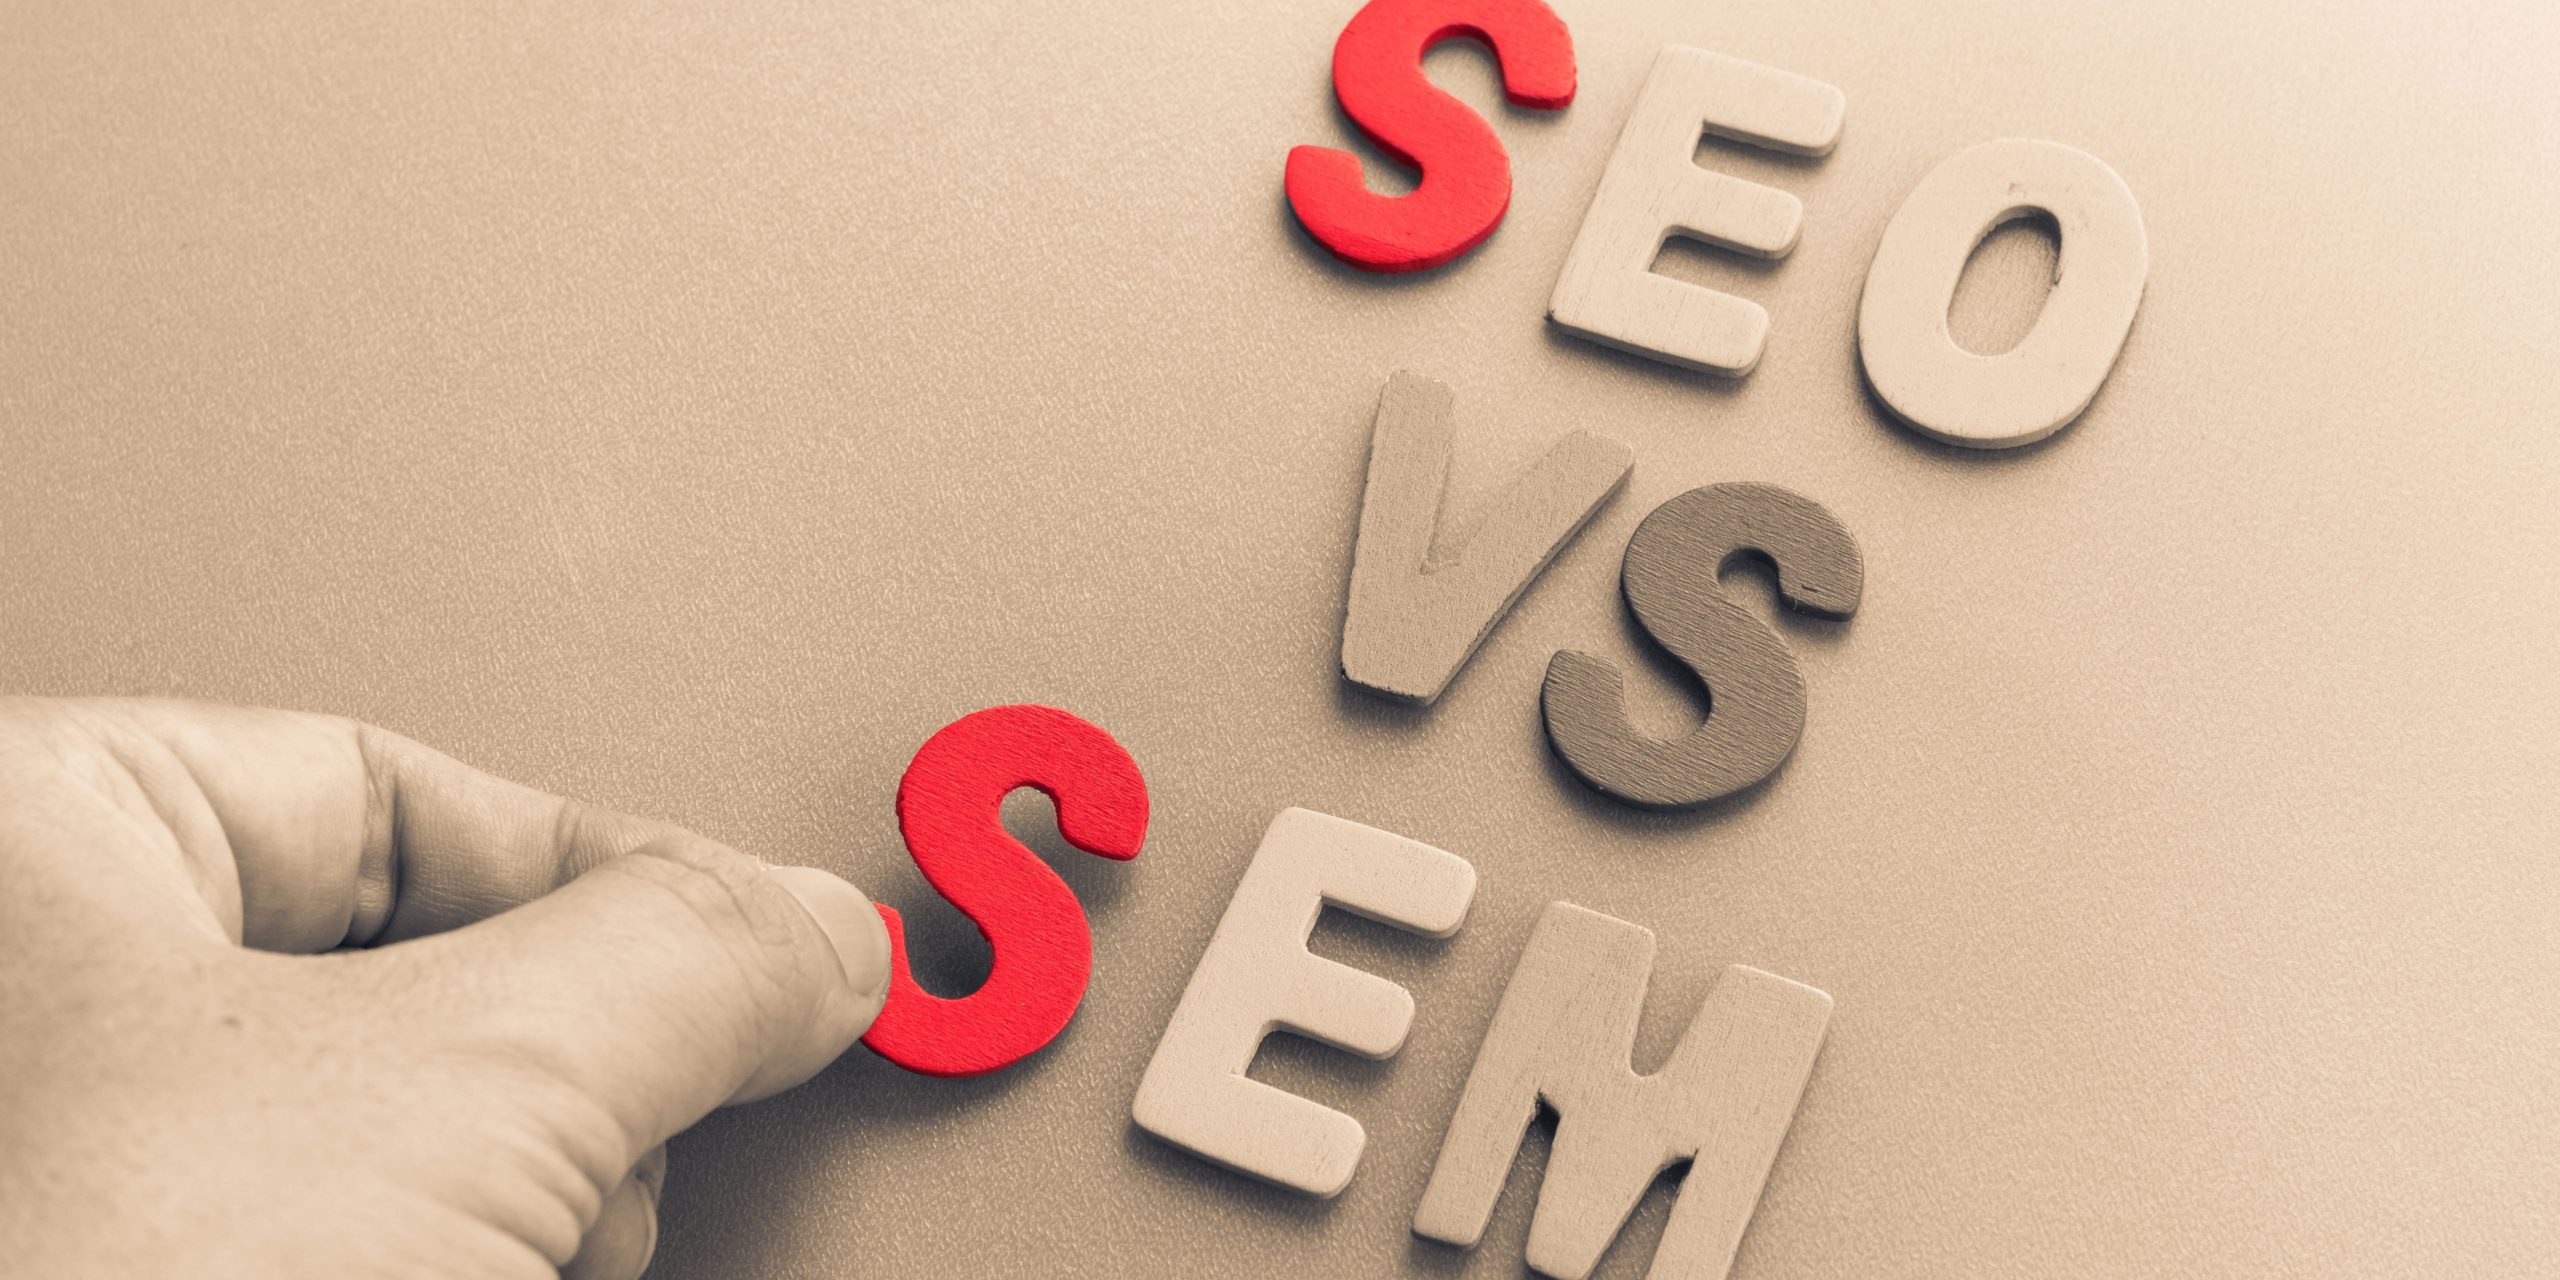 SEO VS. SEM: Which is better?